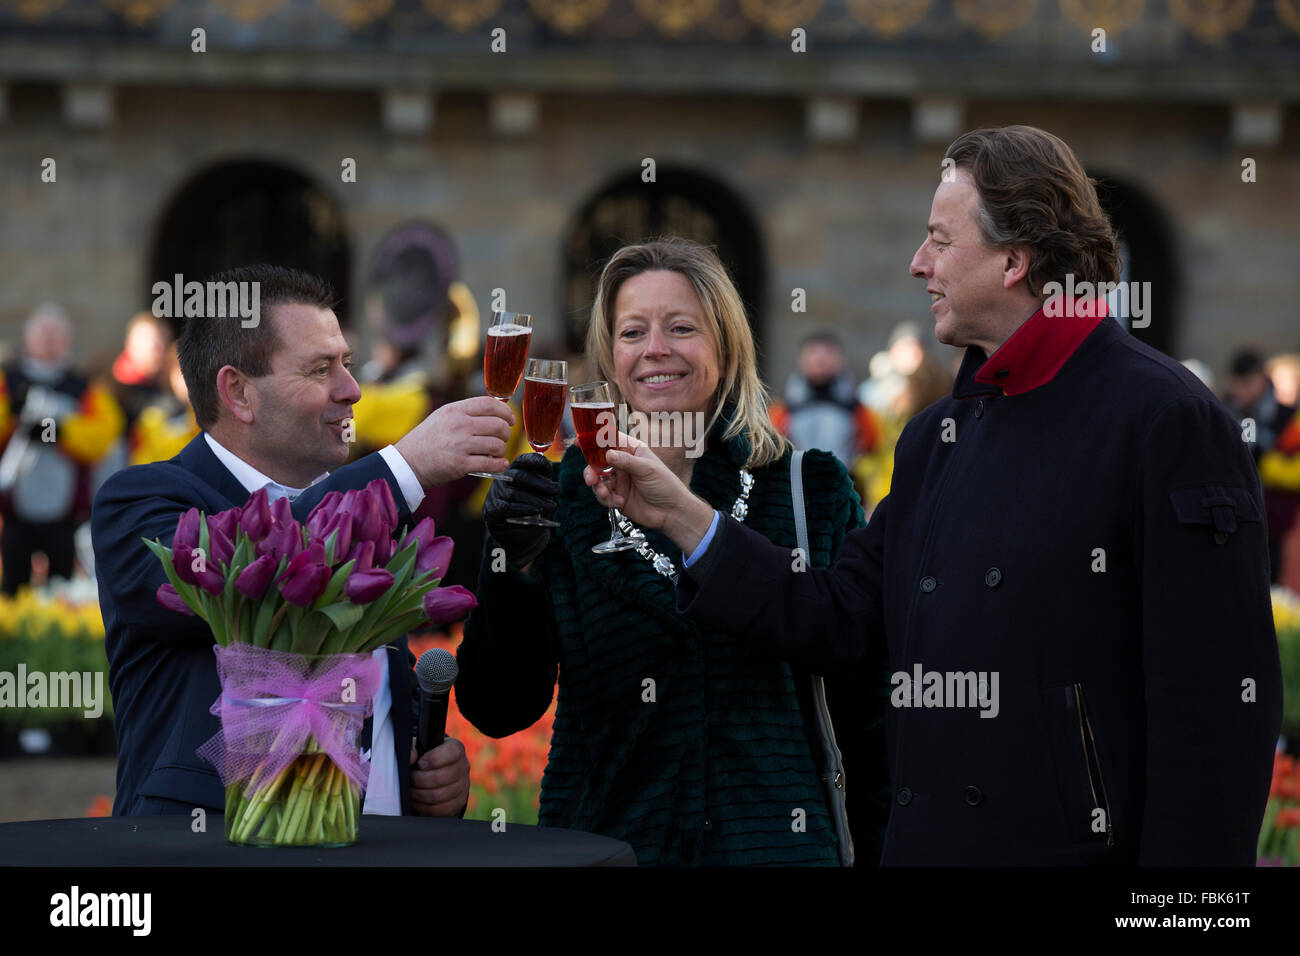 The Spinoza tulip is unveiled on National Tulip Day in Amsterdam, the Netherlands. Stock Photo